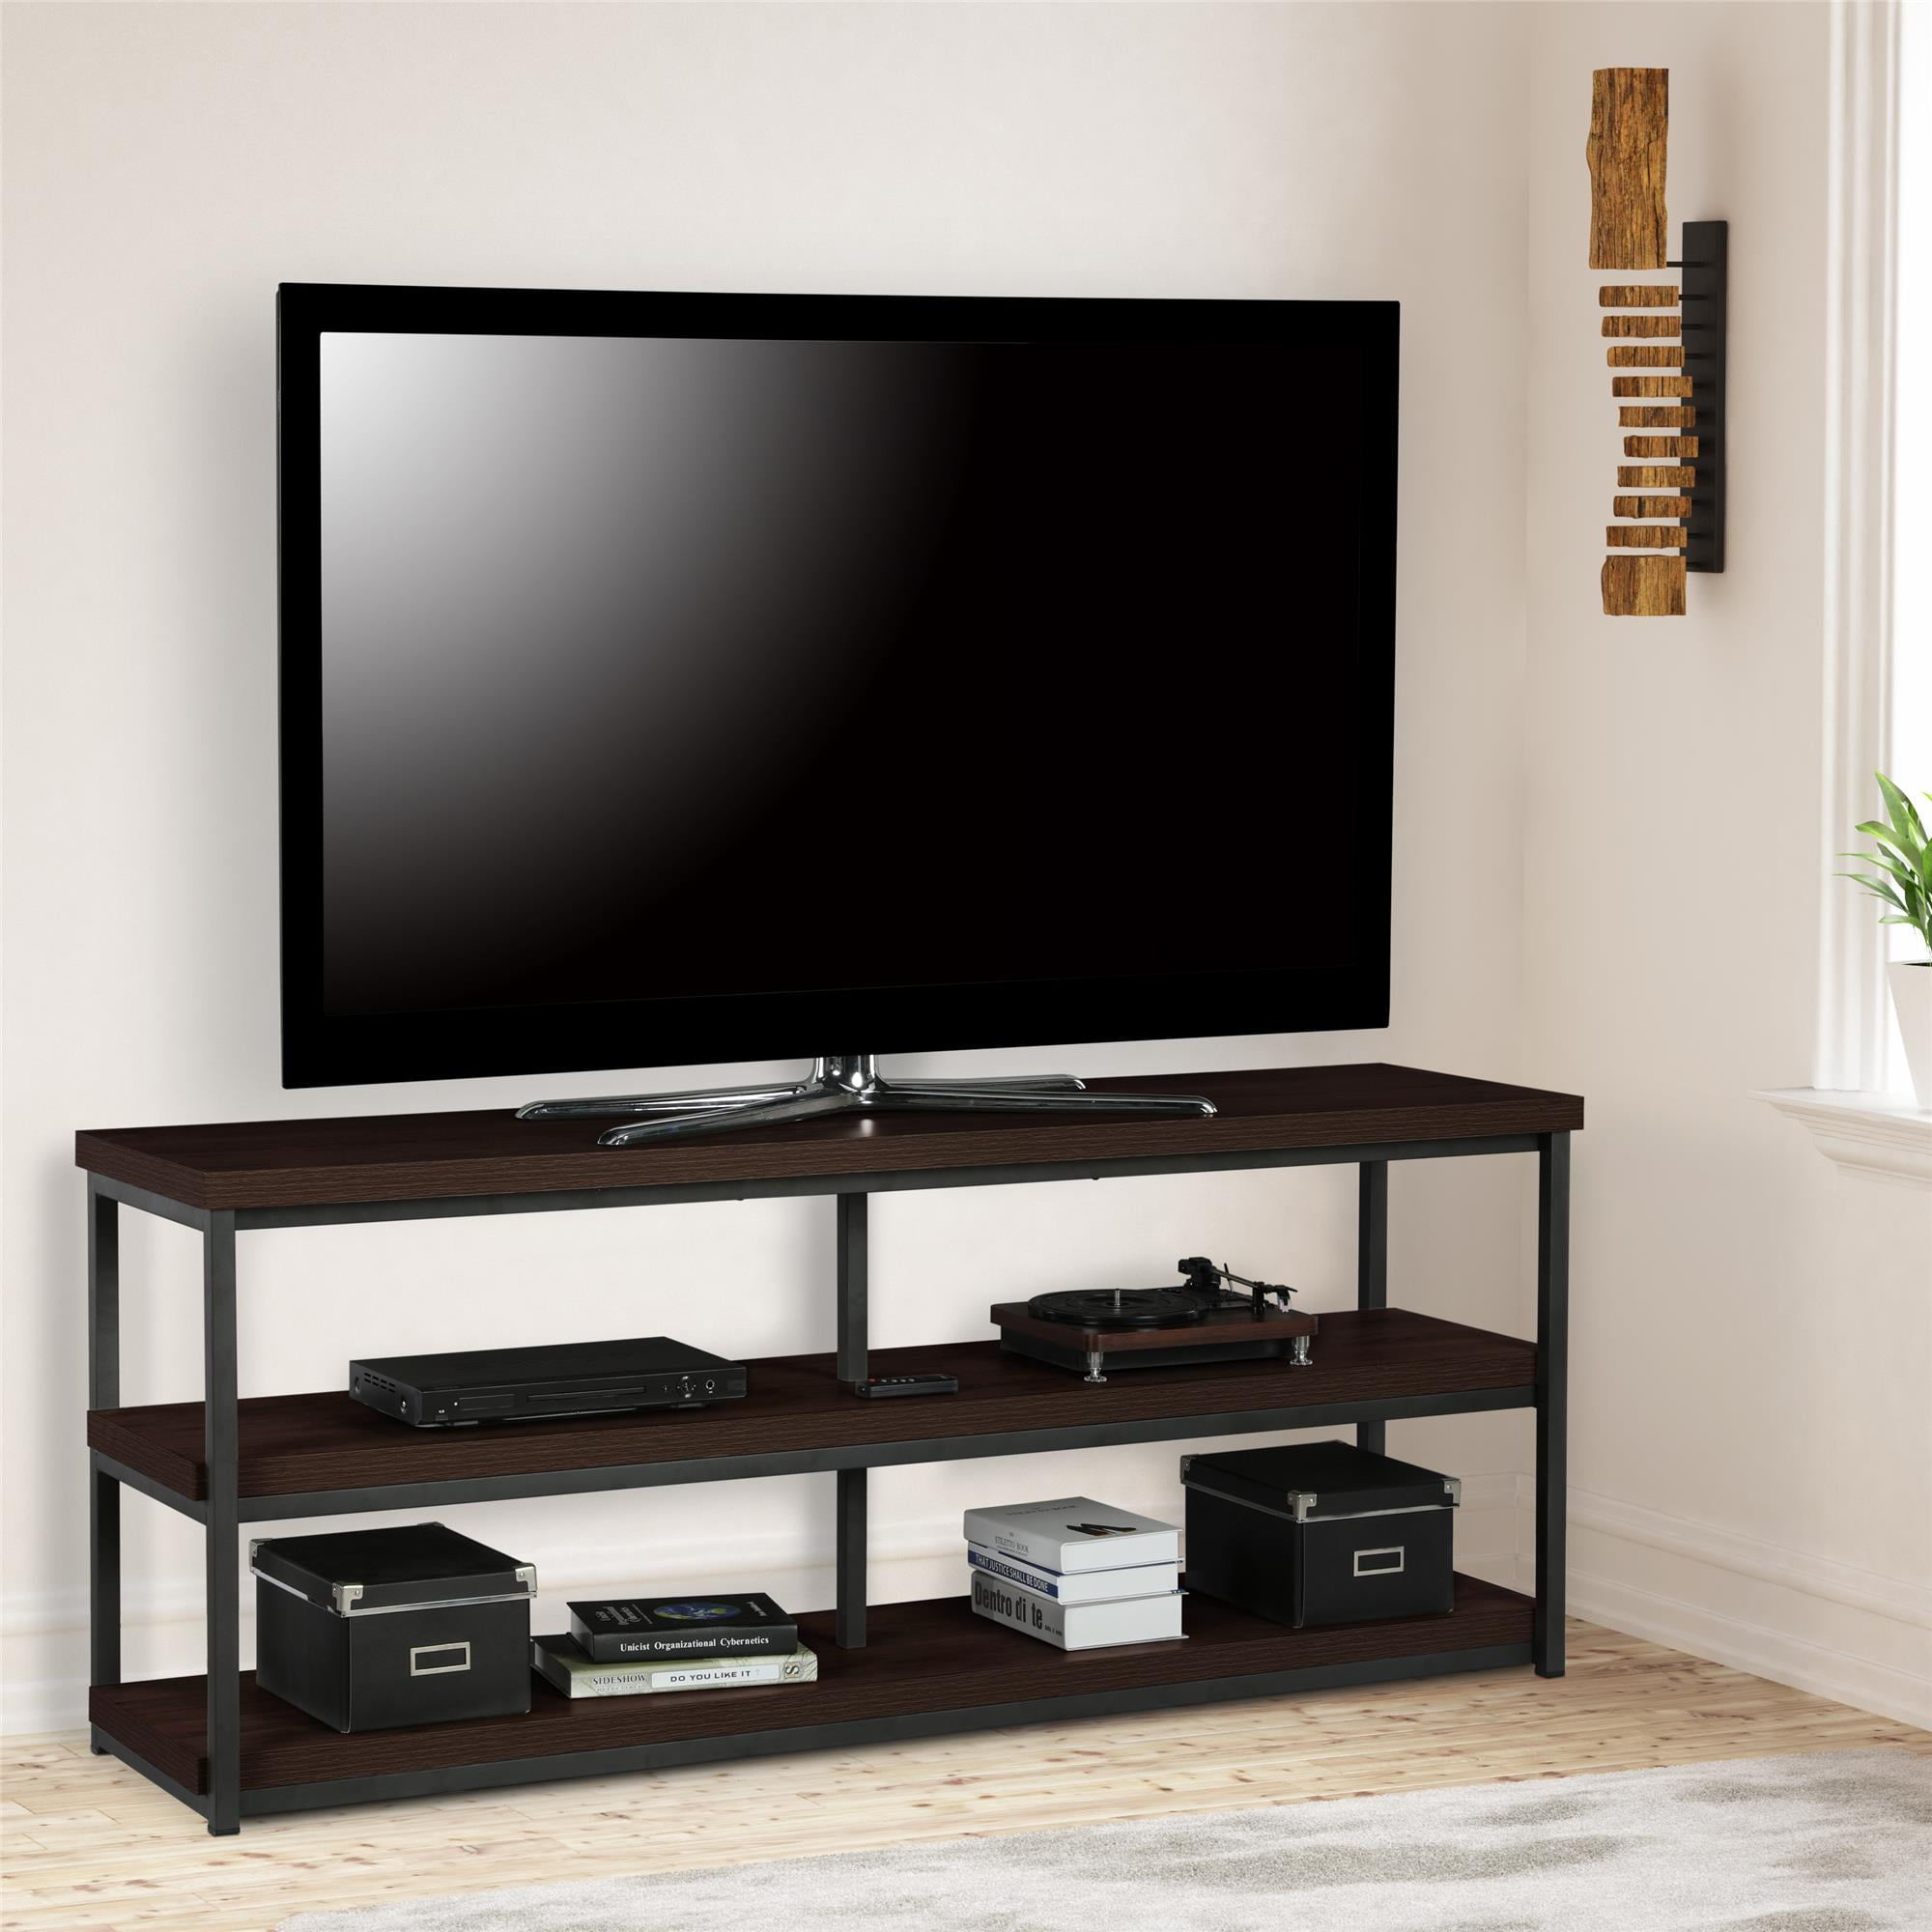 Ameriwood Home Ashlar TV Stand for TVs up to 65", Espresso ...